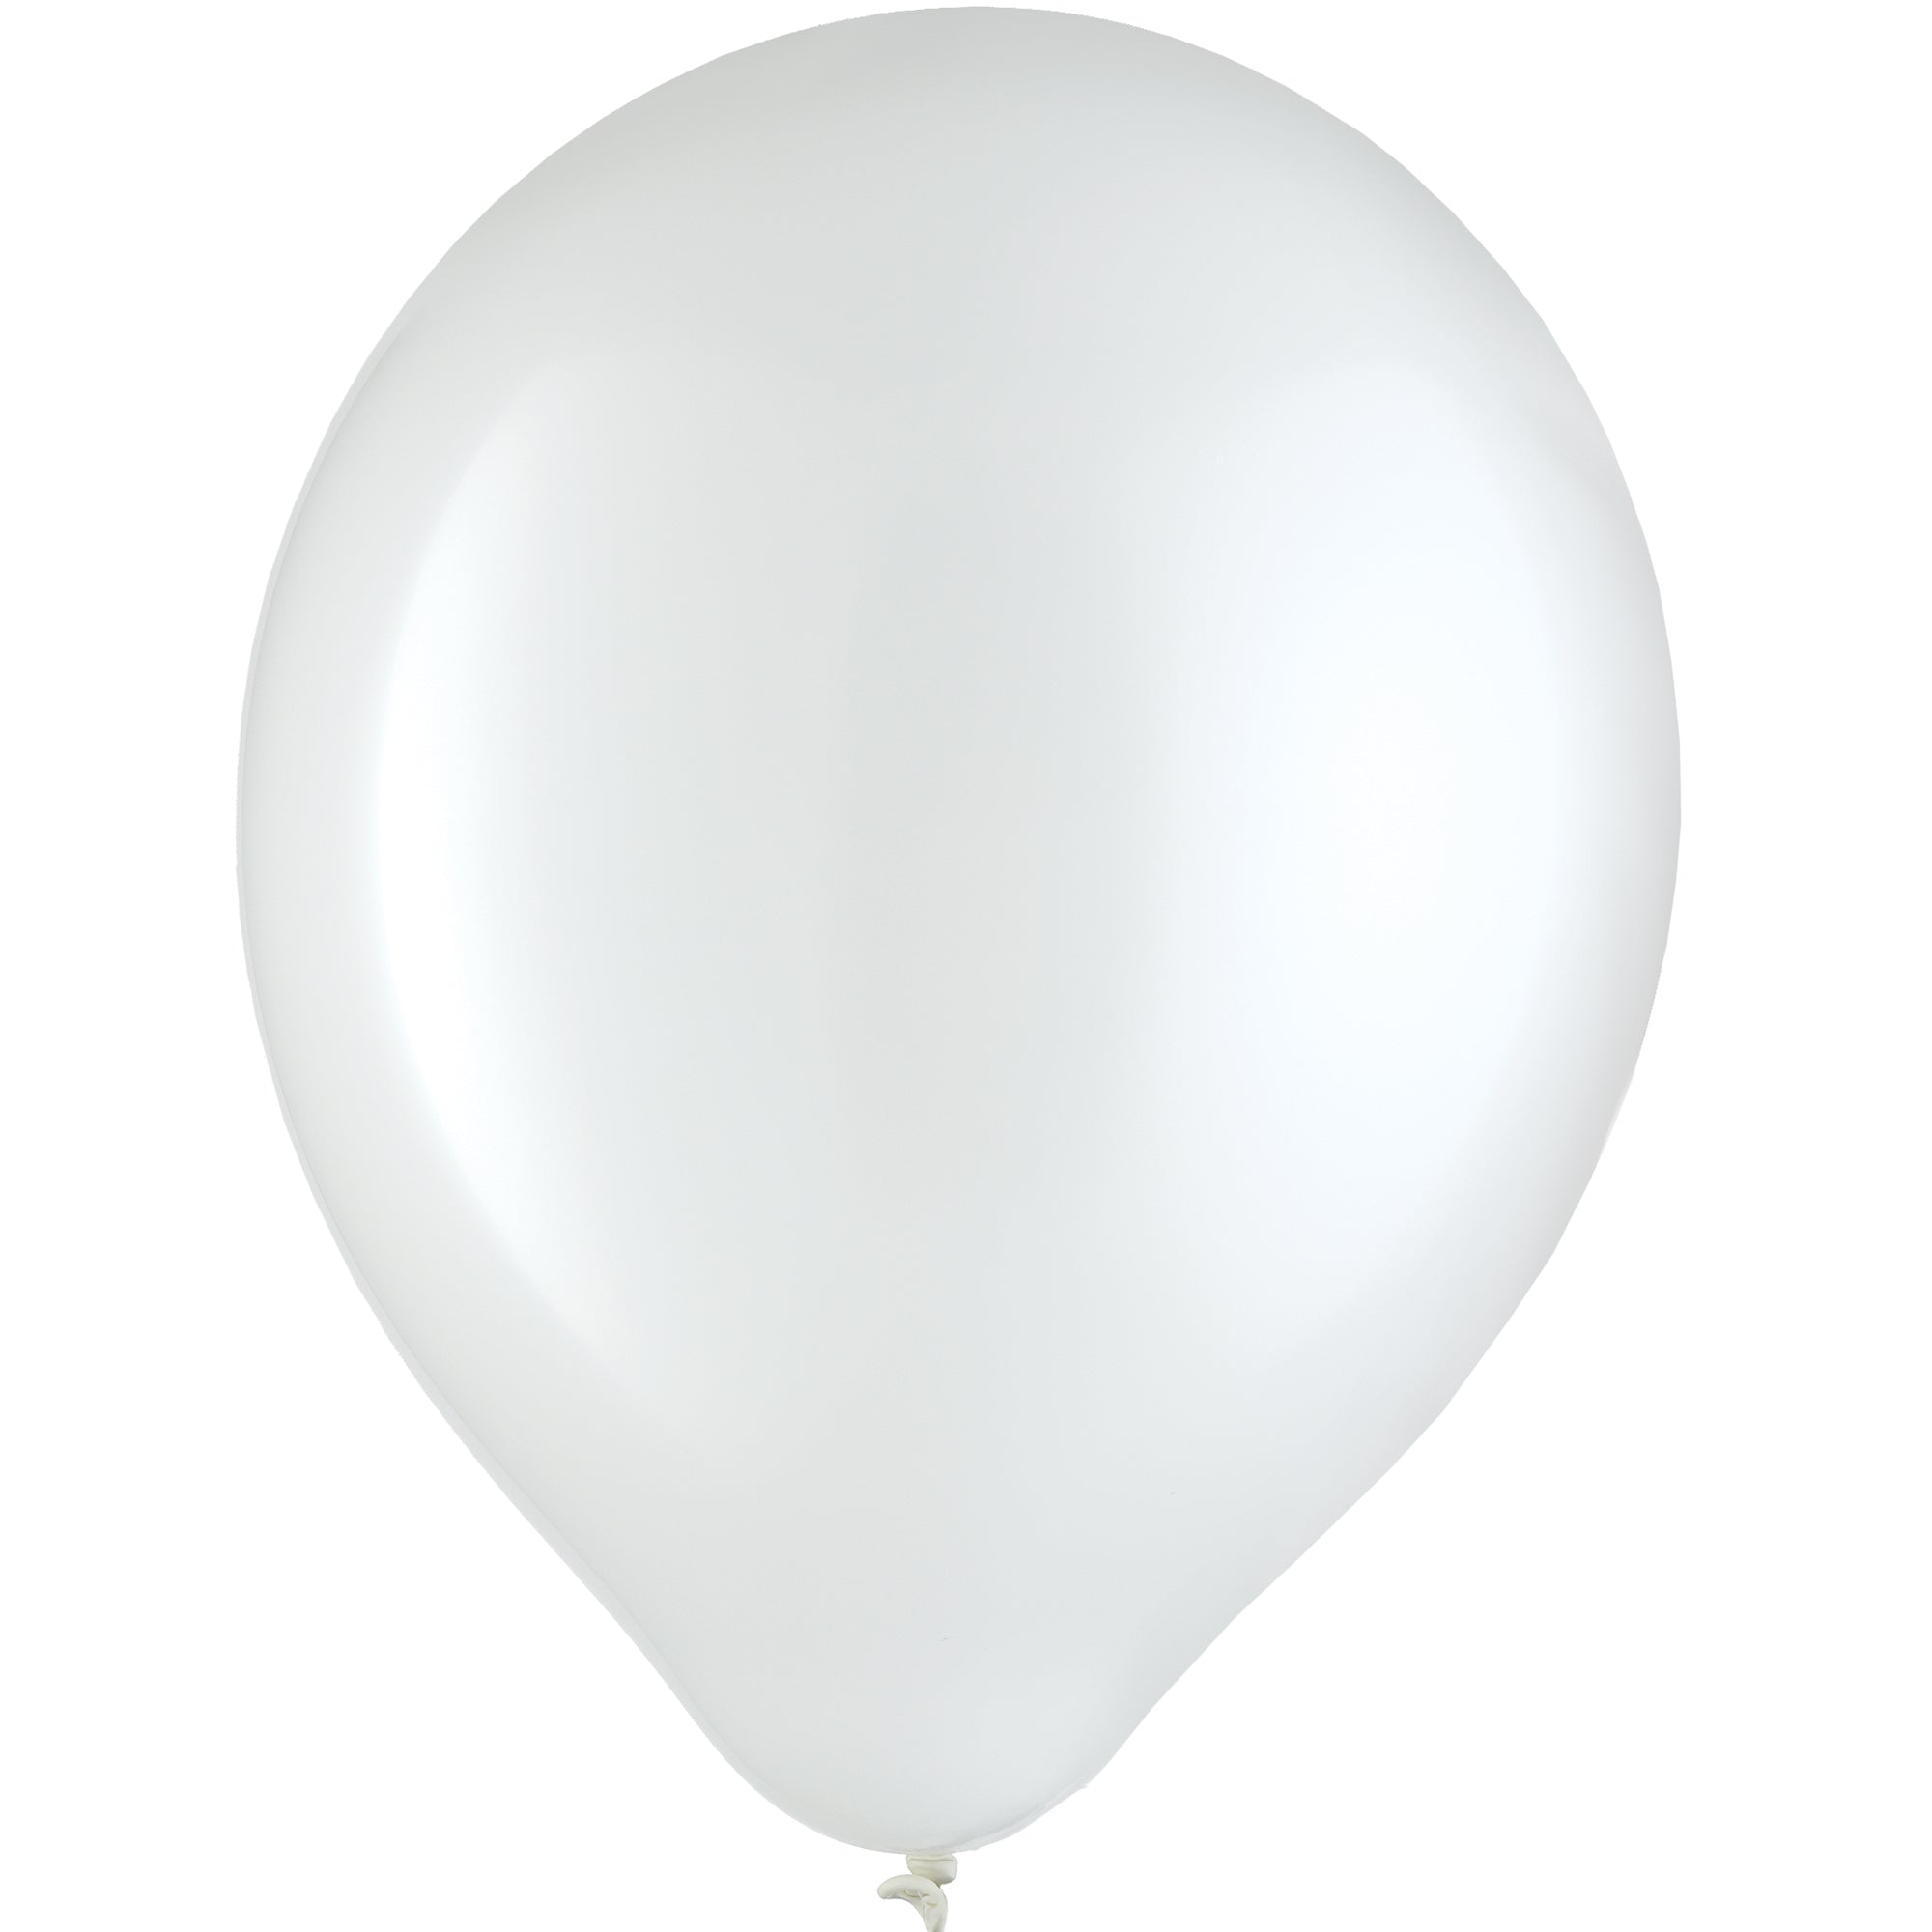 72 Latex Balloons   Frosty White  12in